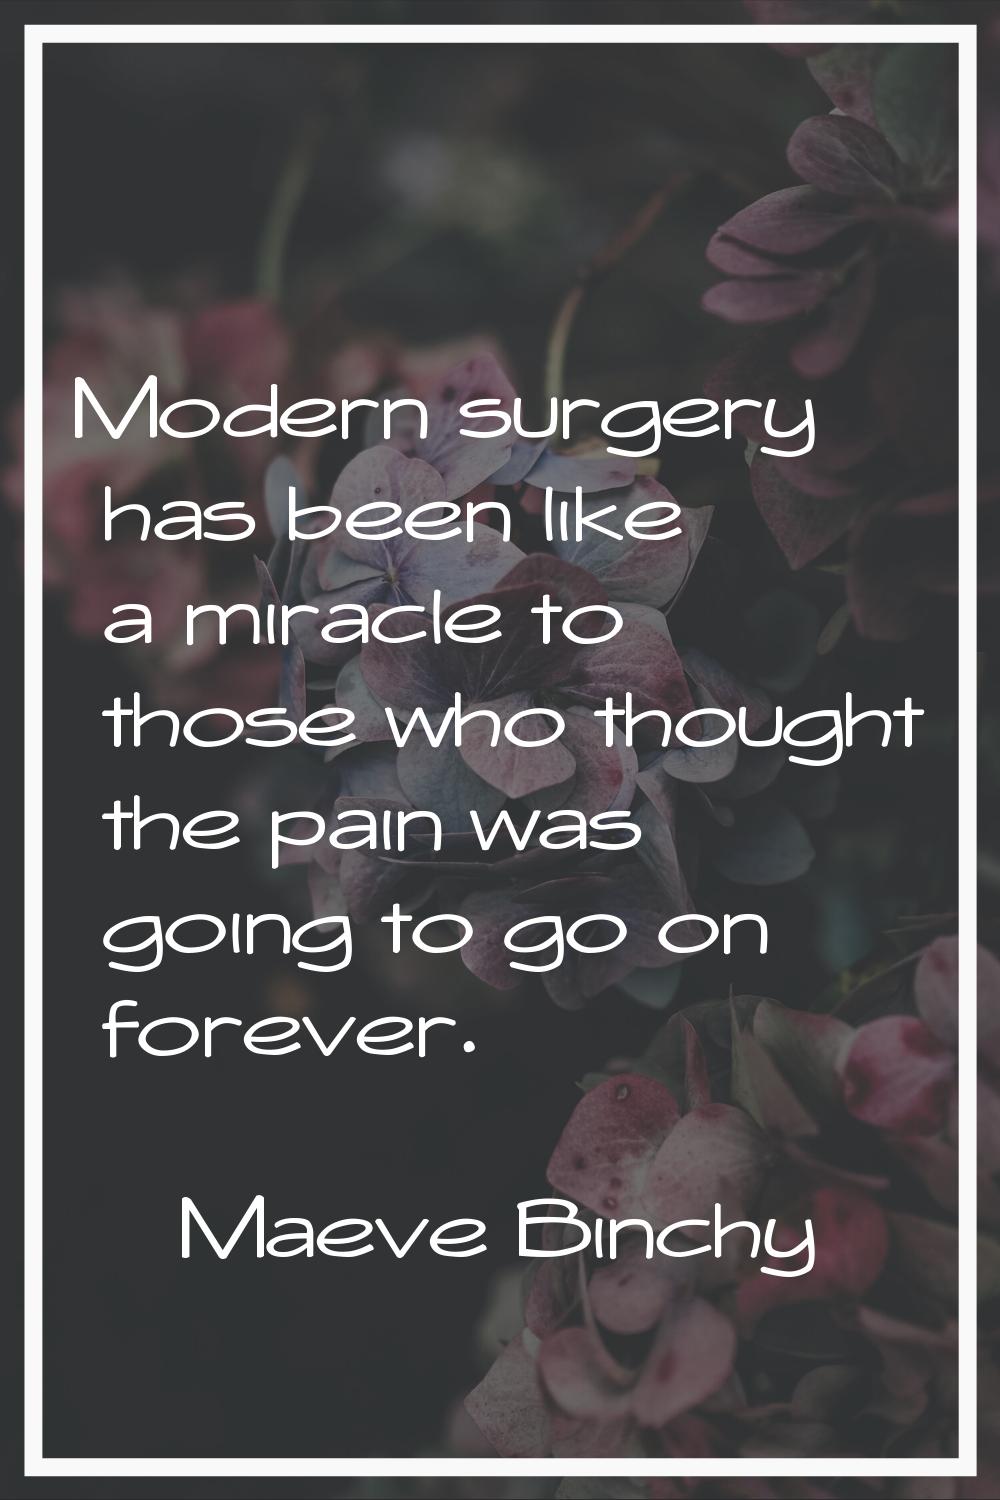 Modern surgery has been like a miracle to those who thought the pain was going to go on forever.